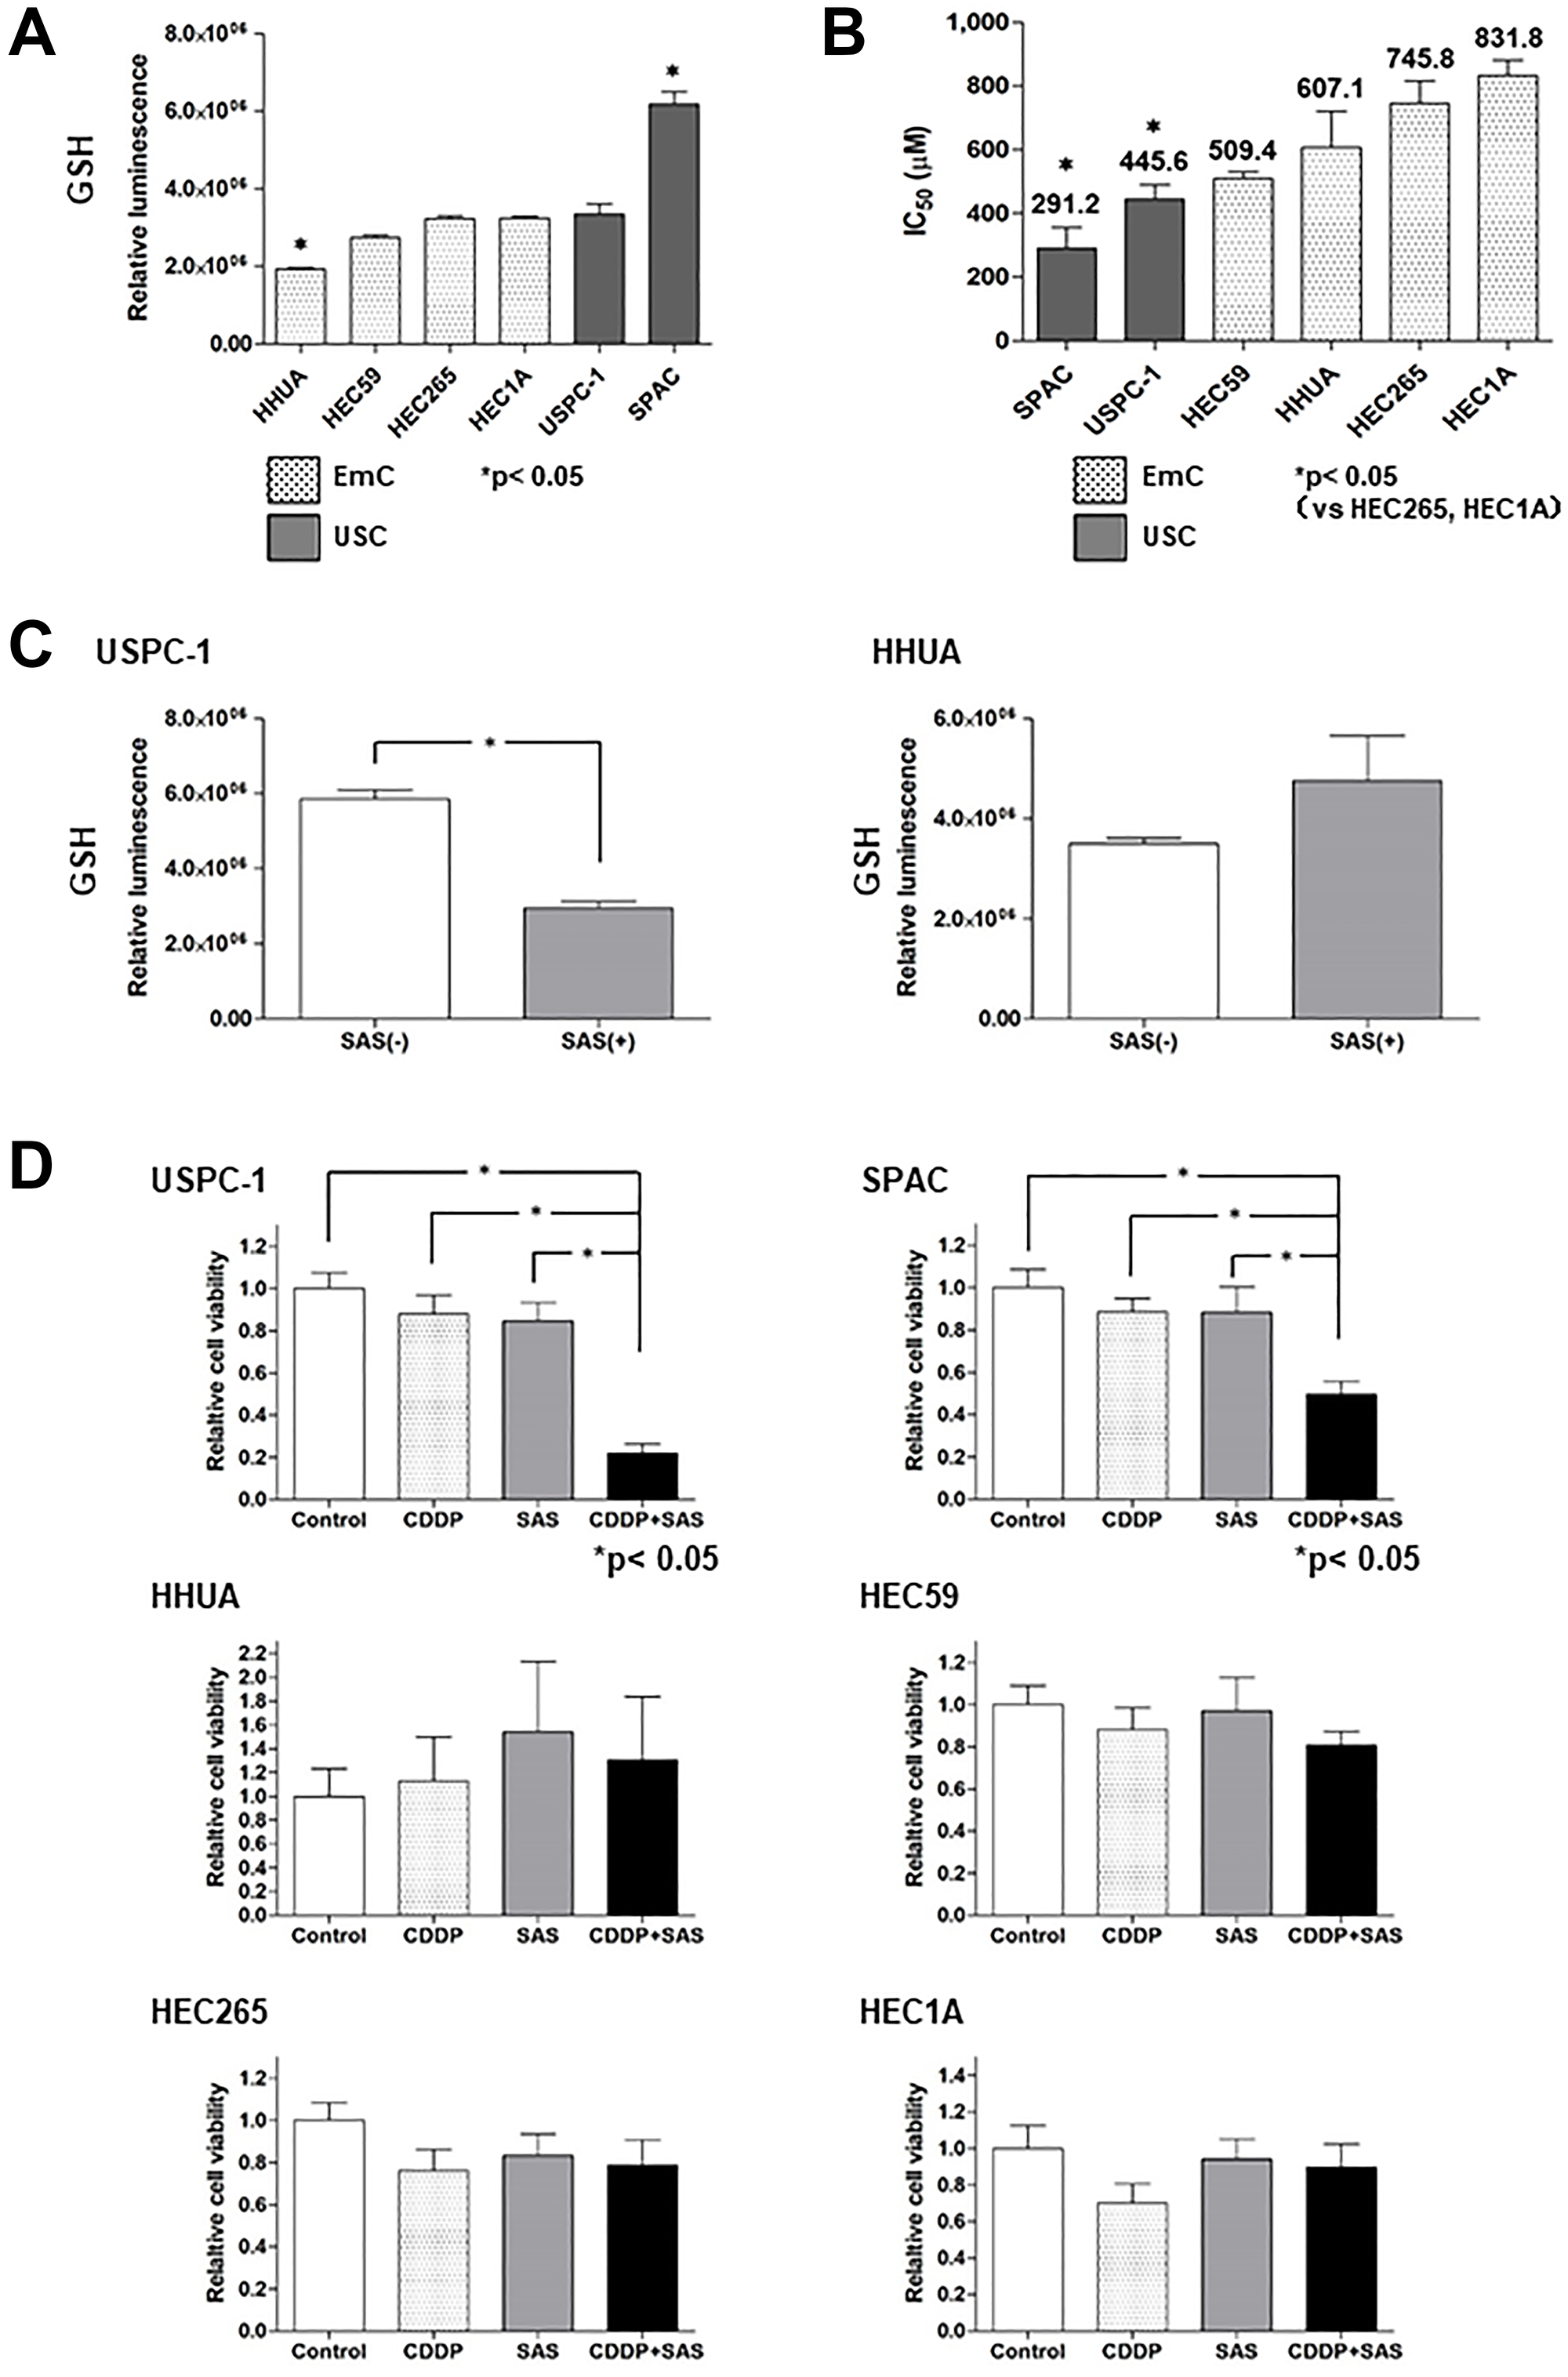 Sulfasalazine (SAS) enhances the efficacy of cisplatin (CDDP) in uterine serous carcinoma (USC) cells resulting from the depletion of intracellular glutathione (GSH).